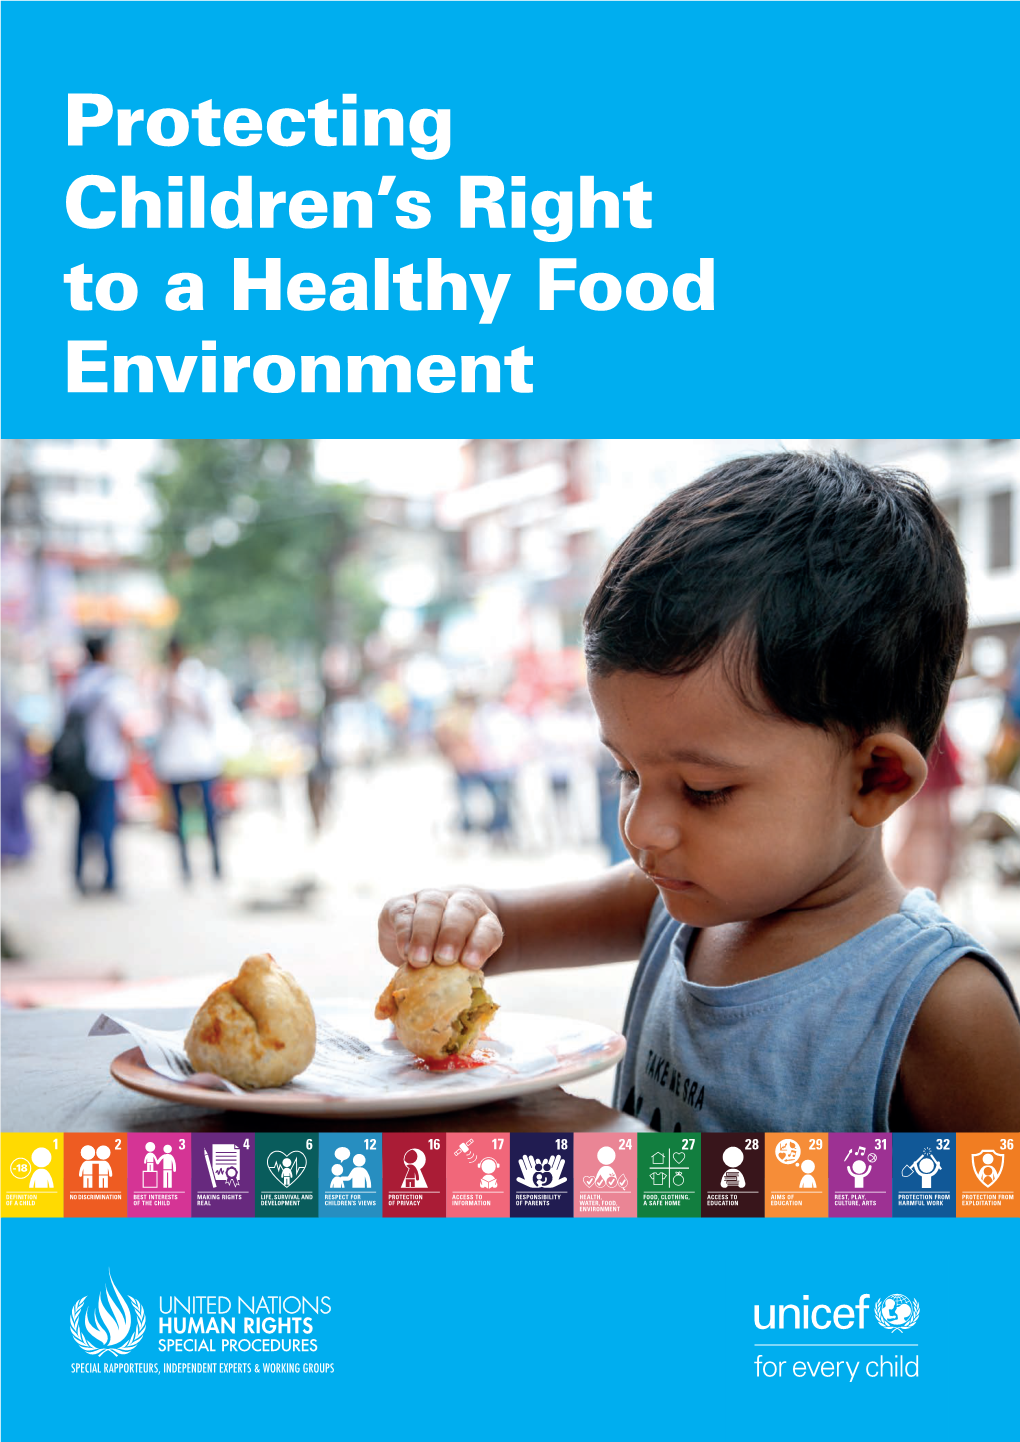 Protecting Children's Right to a Healthy Food Environment